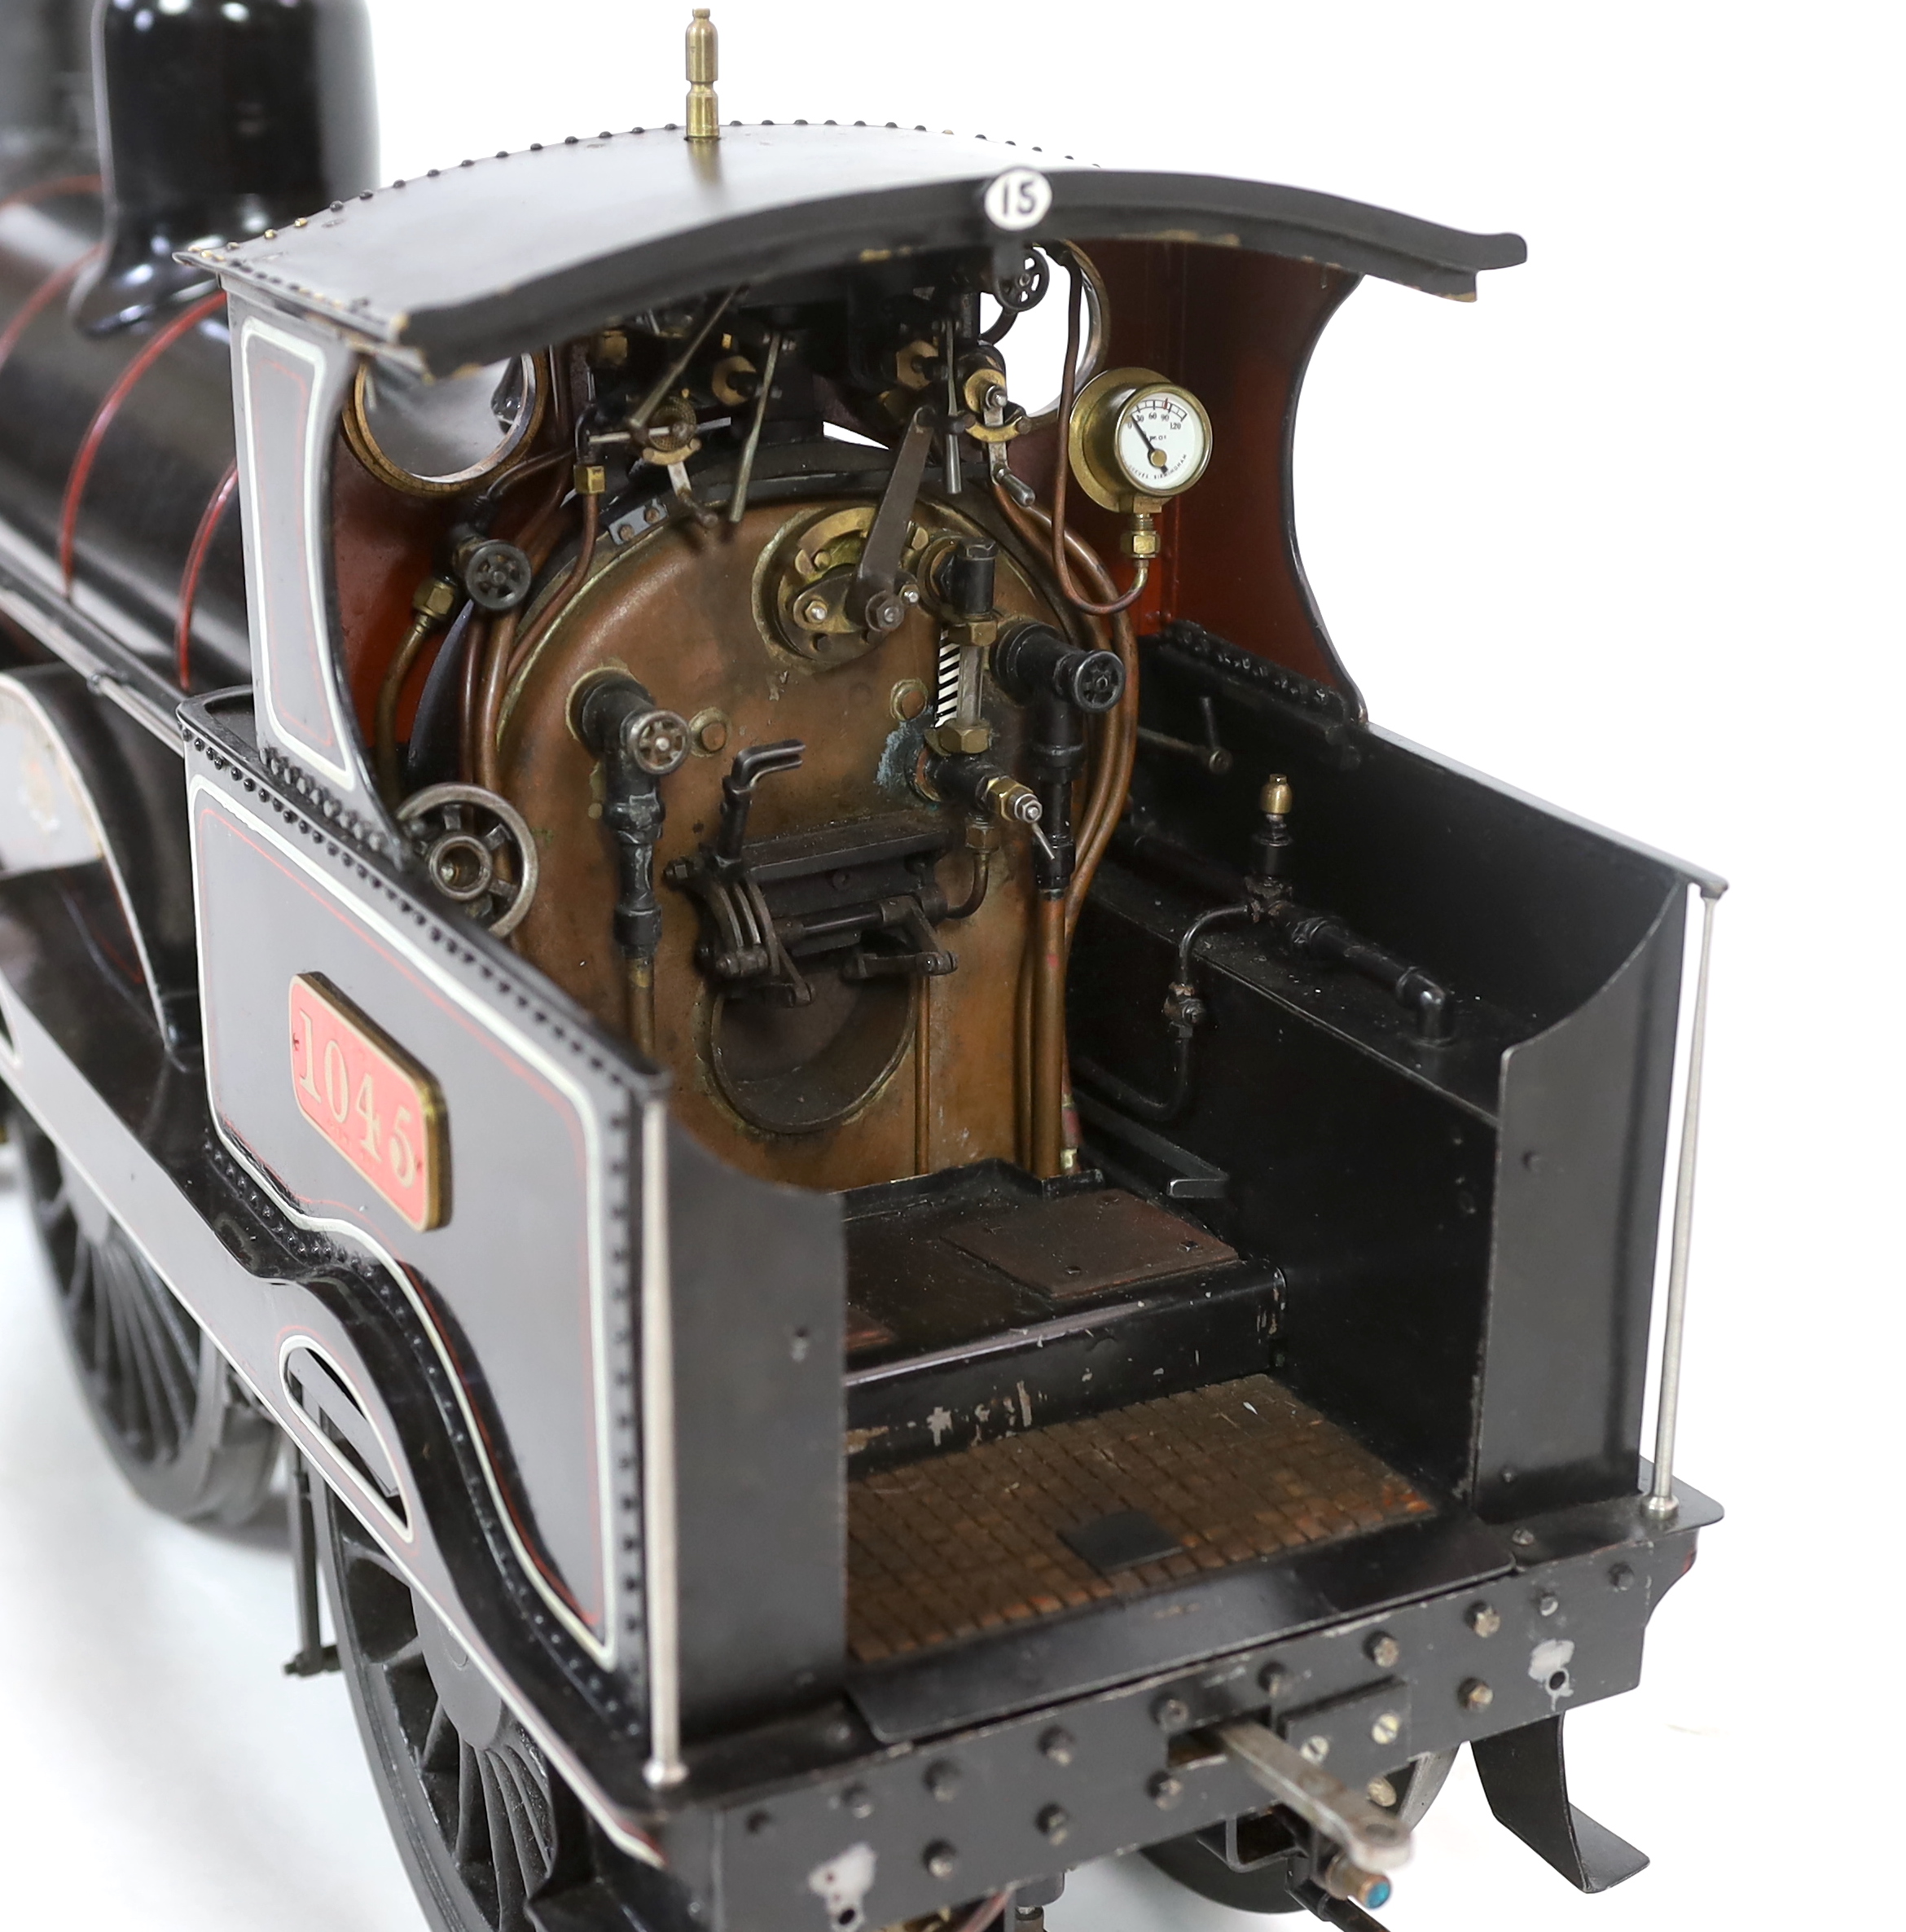 A very finely engineered scratch-built 5” gauge live steam model of a LNWR (London and North Western Railway) Jumbo 2-4-0 tender locomotive, No. 1045 ‘Whitworth’